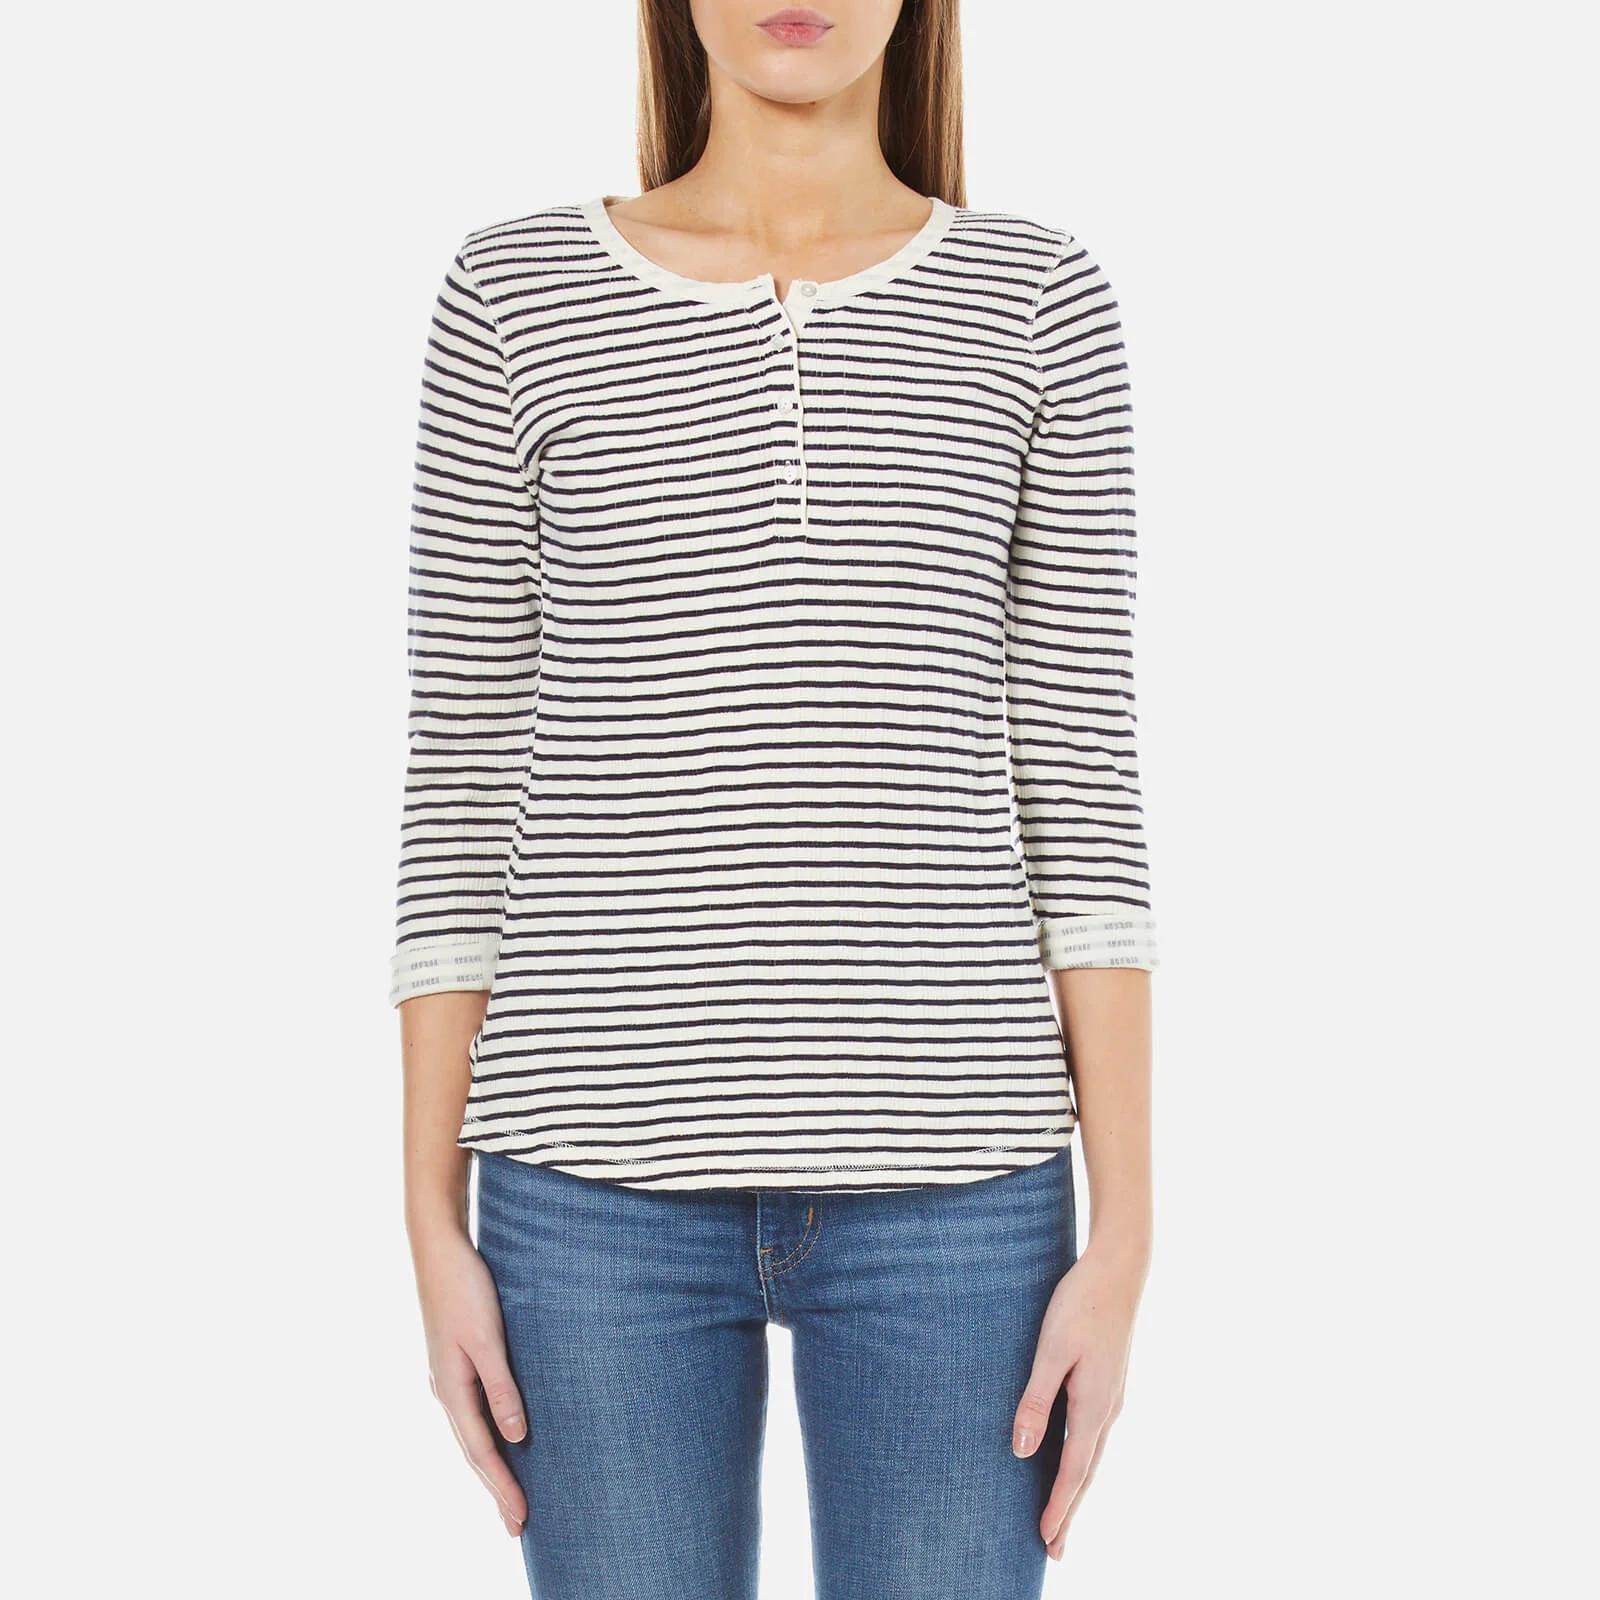 Maison Scotch Women's Home Alone Bonded Grandad Top with 3/4 Sleeve - Combo B Image 1